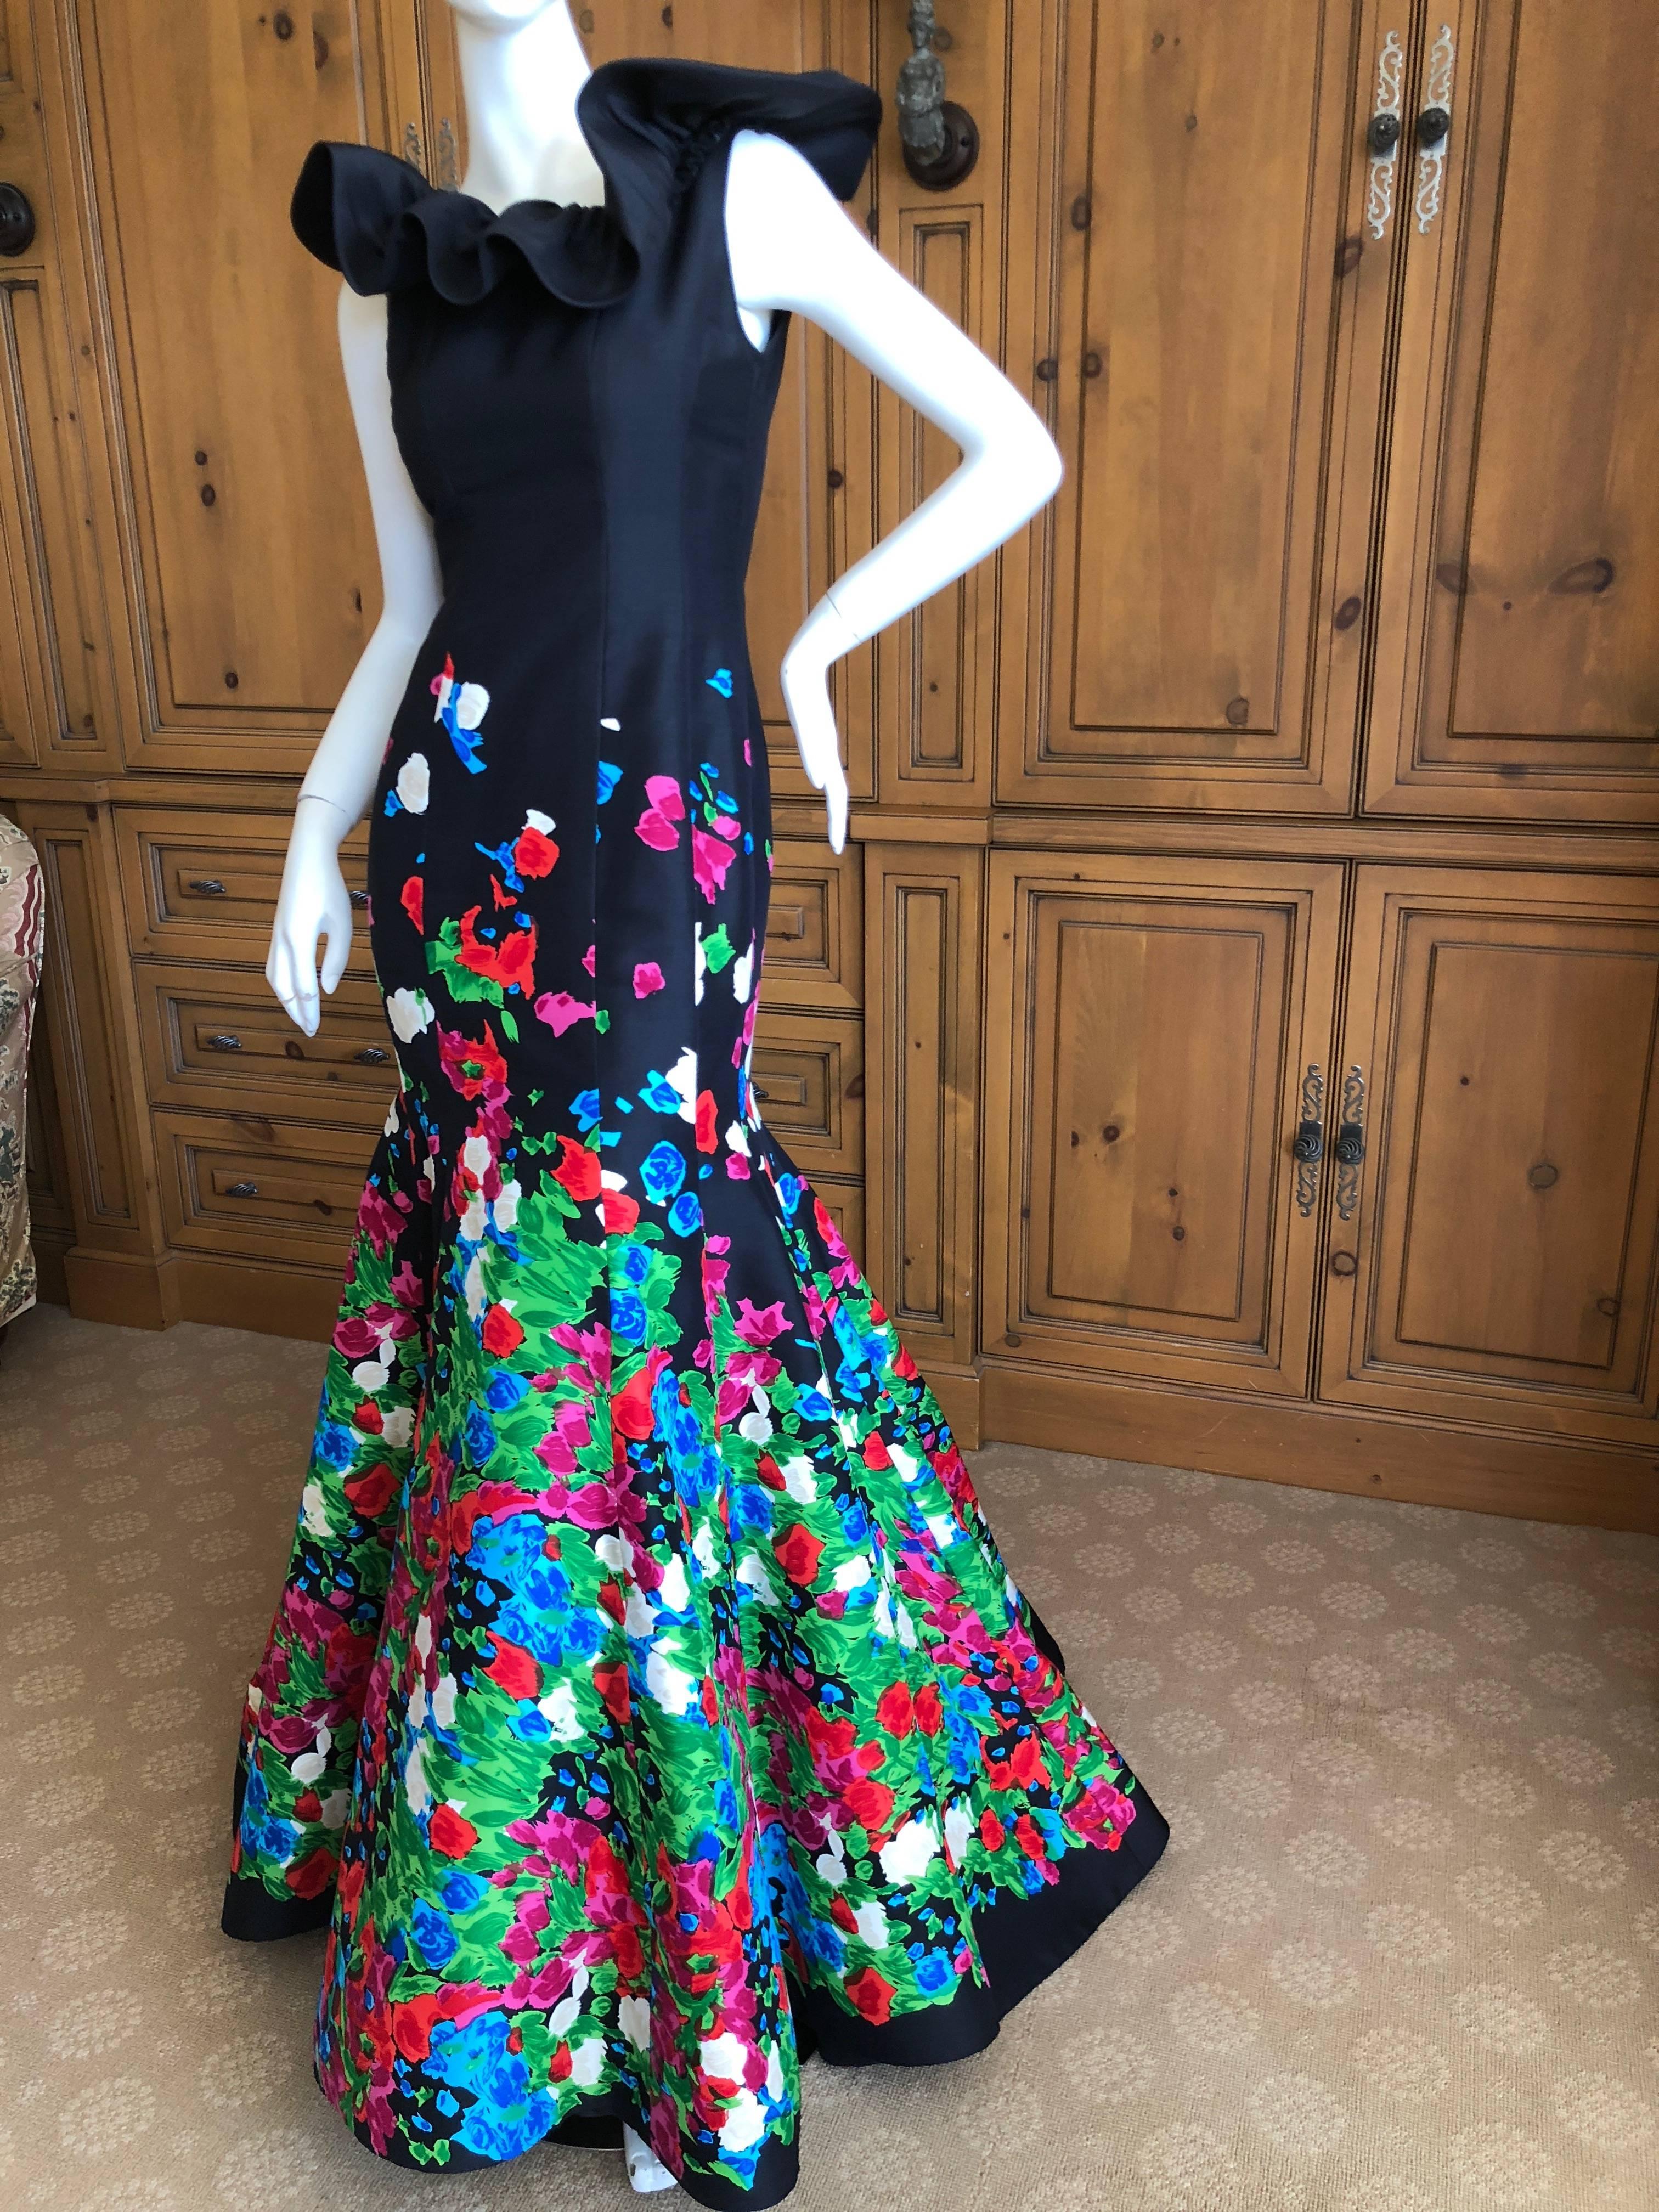 Oscar de la Renta Romantic Rose Floral Embellished Black SIlk Evening Dress.
This is such a pretty dress, the photos don't do it justice .
Ruffled collar , under layers of skirting and a flowing train.
Classic Oscar.
Size 2
Bust 34